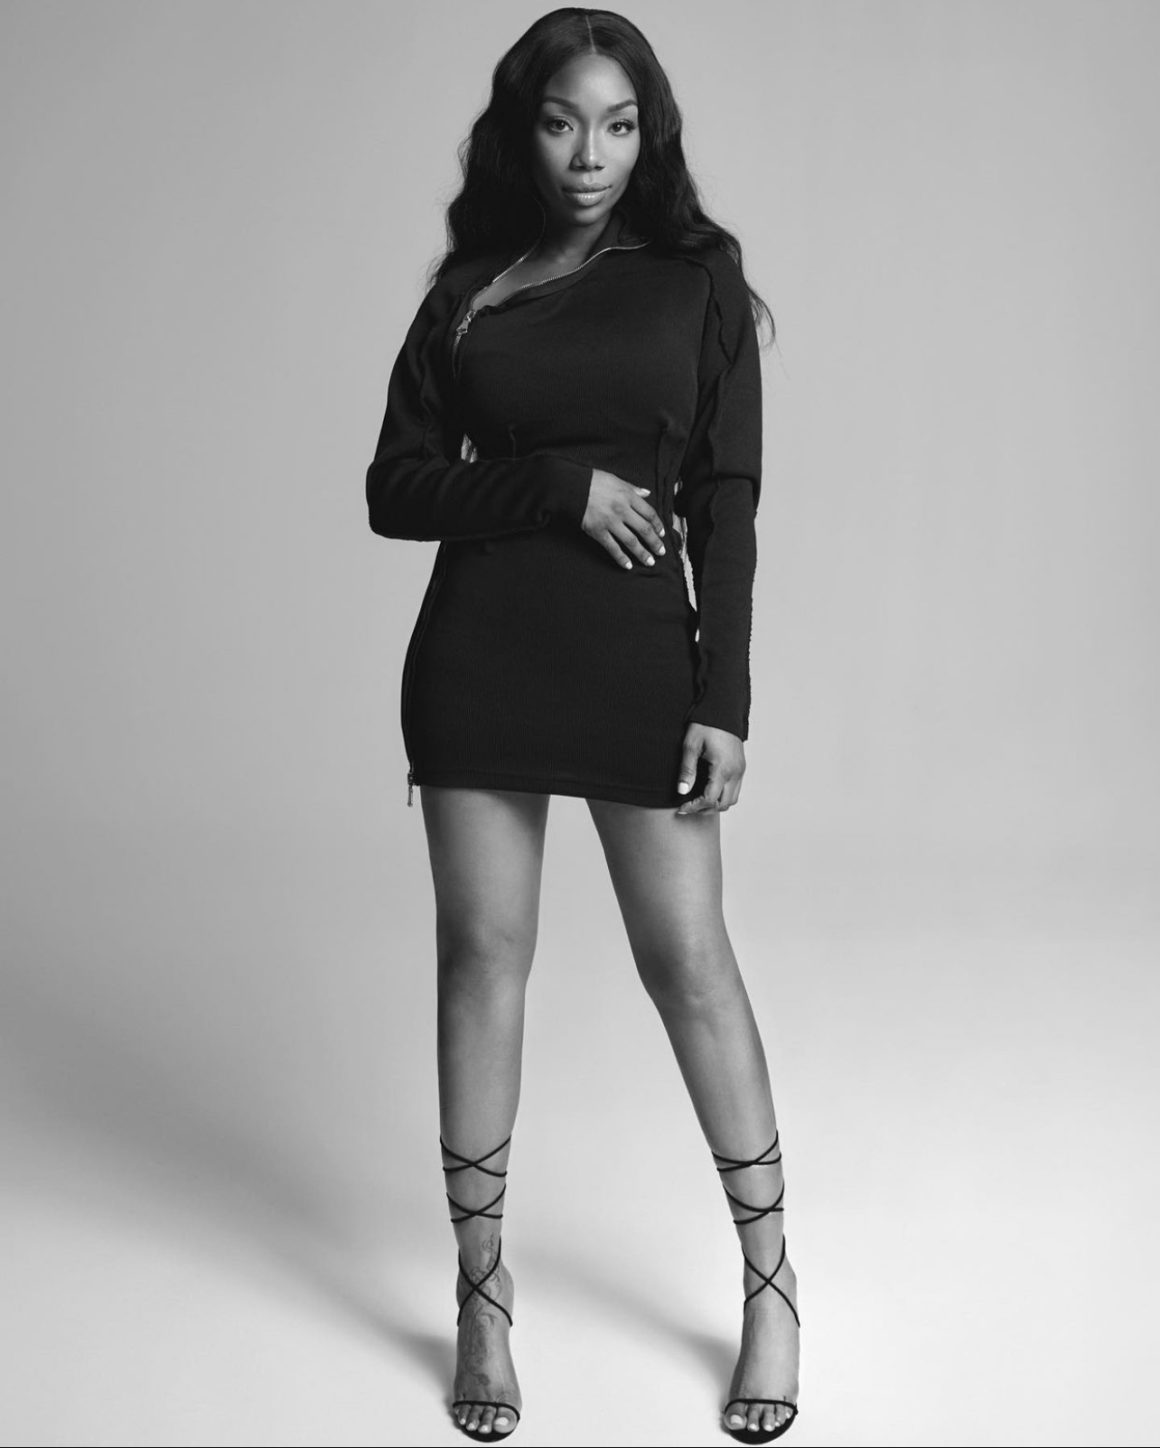 Brandy Stuns in Black and White Photoshoot Wearing Lionne Clothing Black Long Sleeve Zip Up Mini Dress and Femme LA Black Lace Up Sandals4